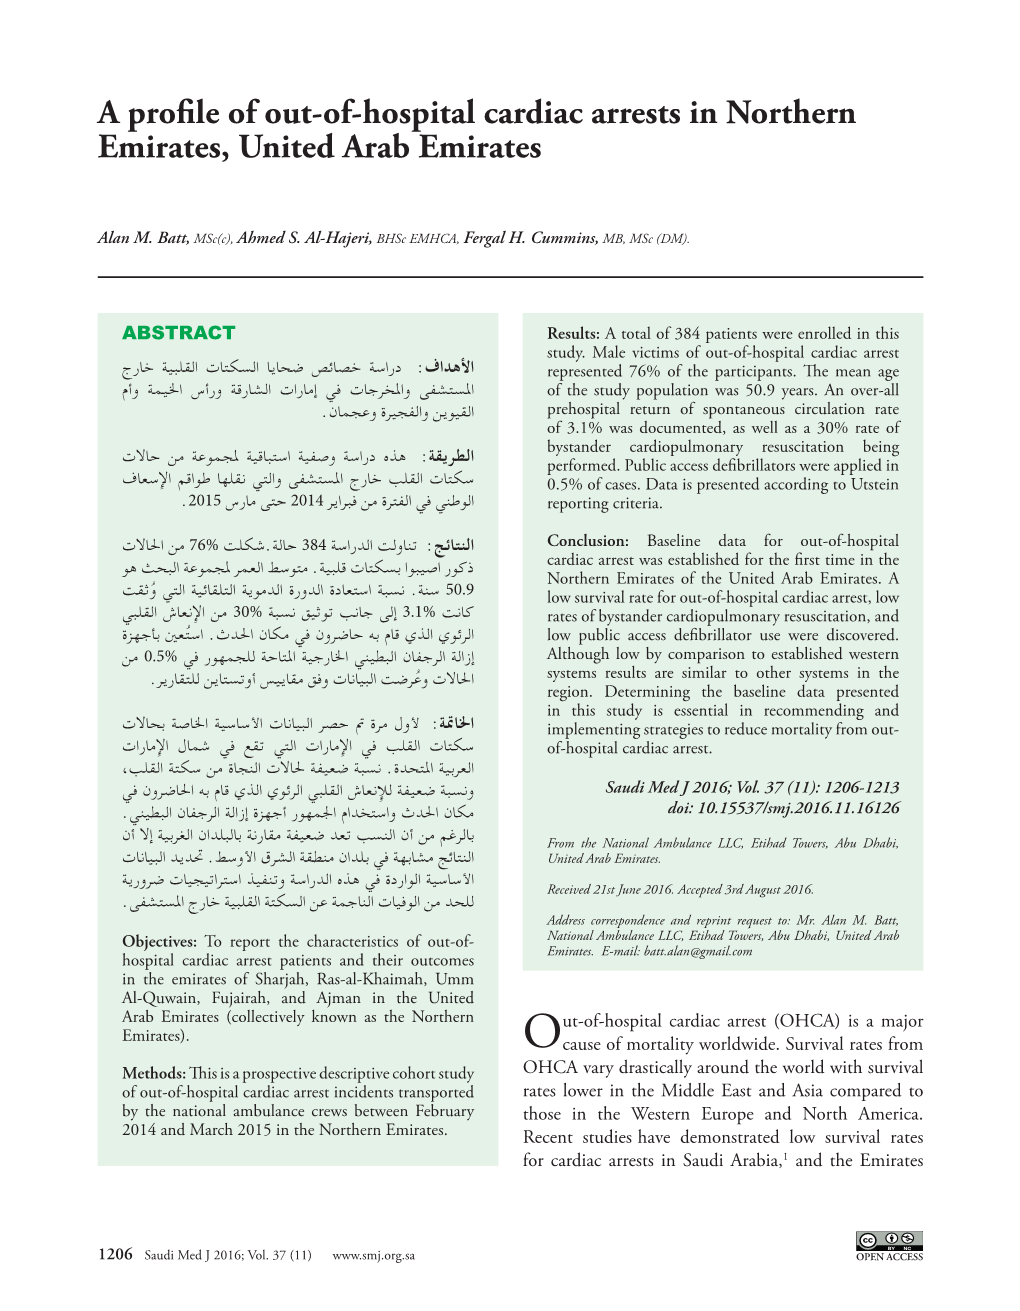 A Profile of Out-Of-Hospital Cardiac Arrests in Northern Emirates, United Arab Emirates